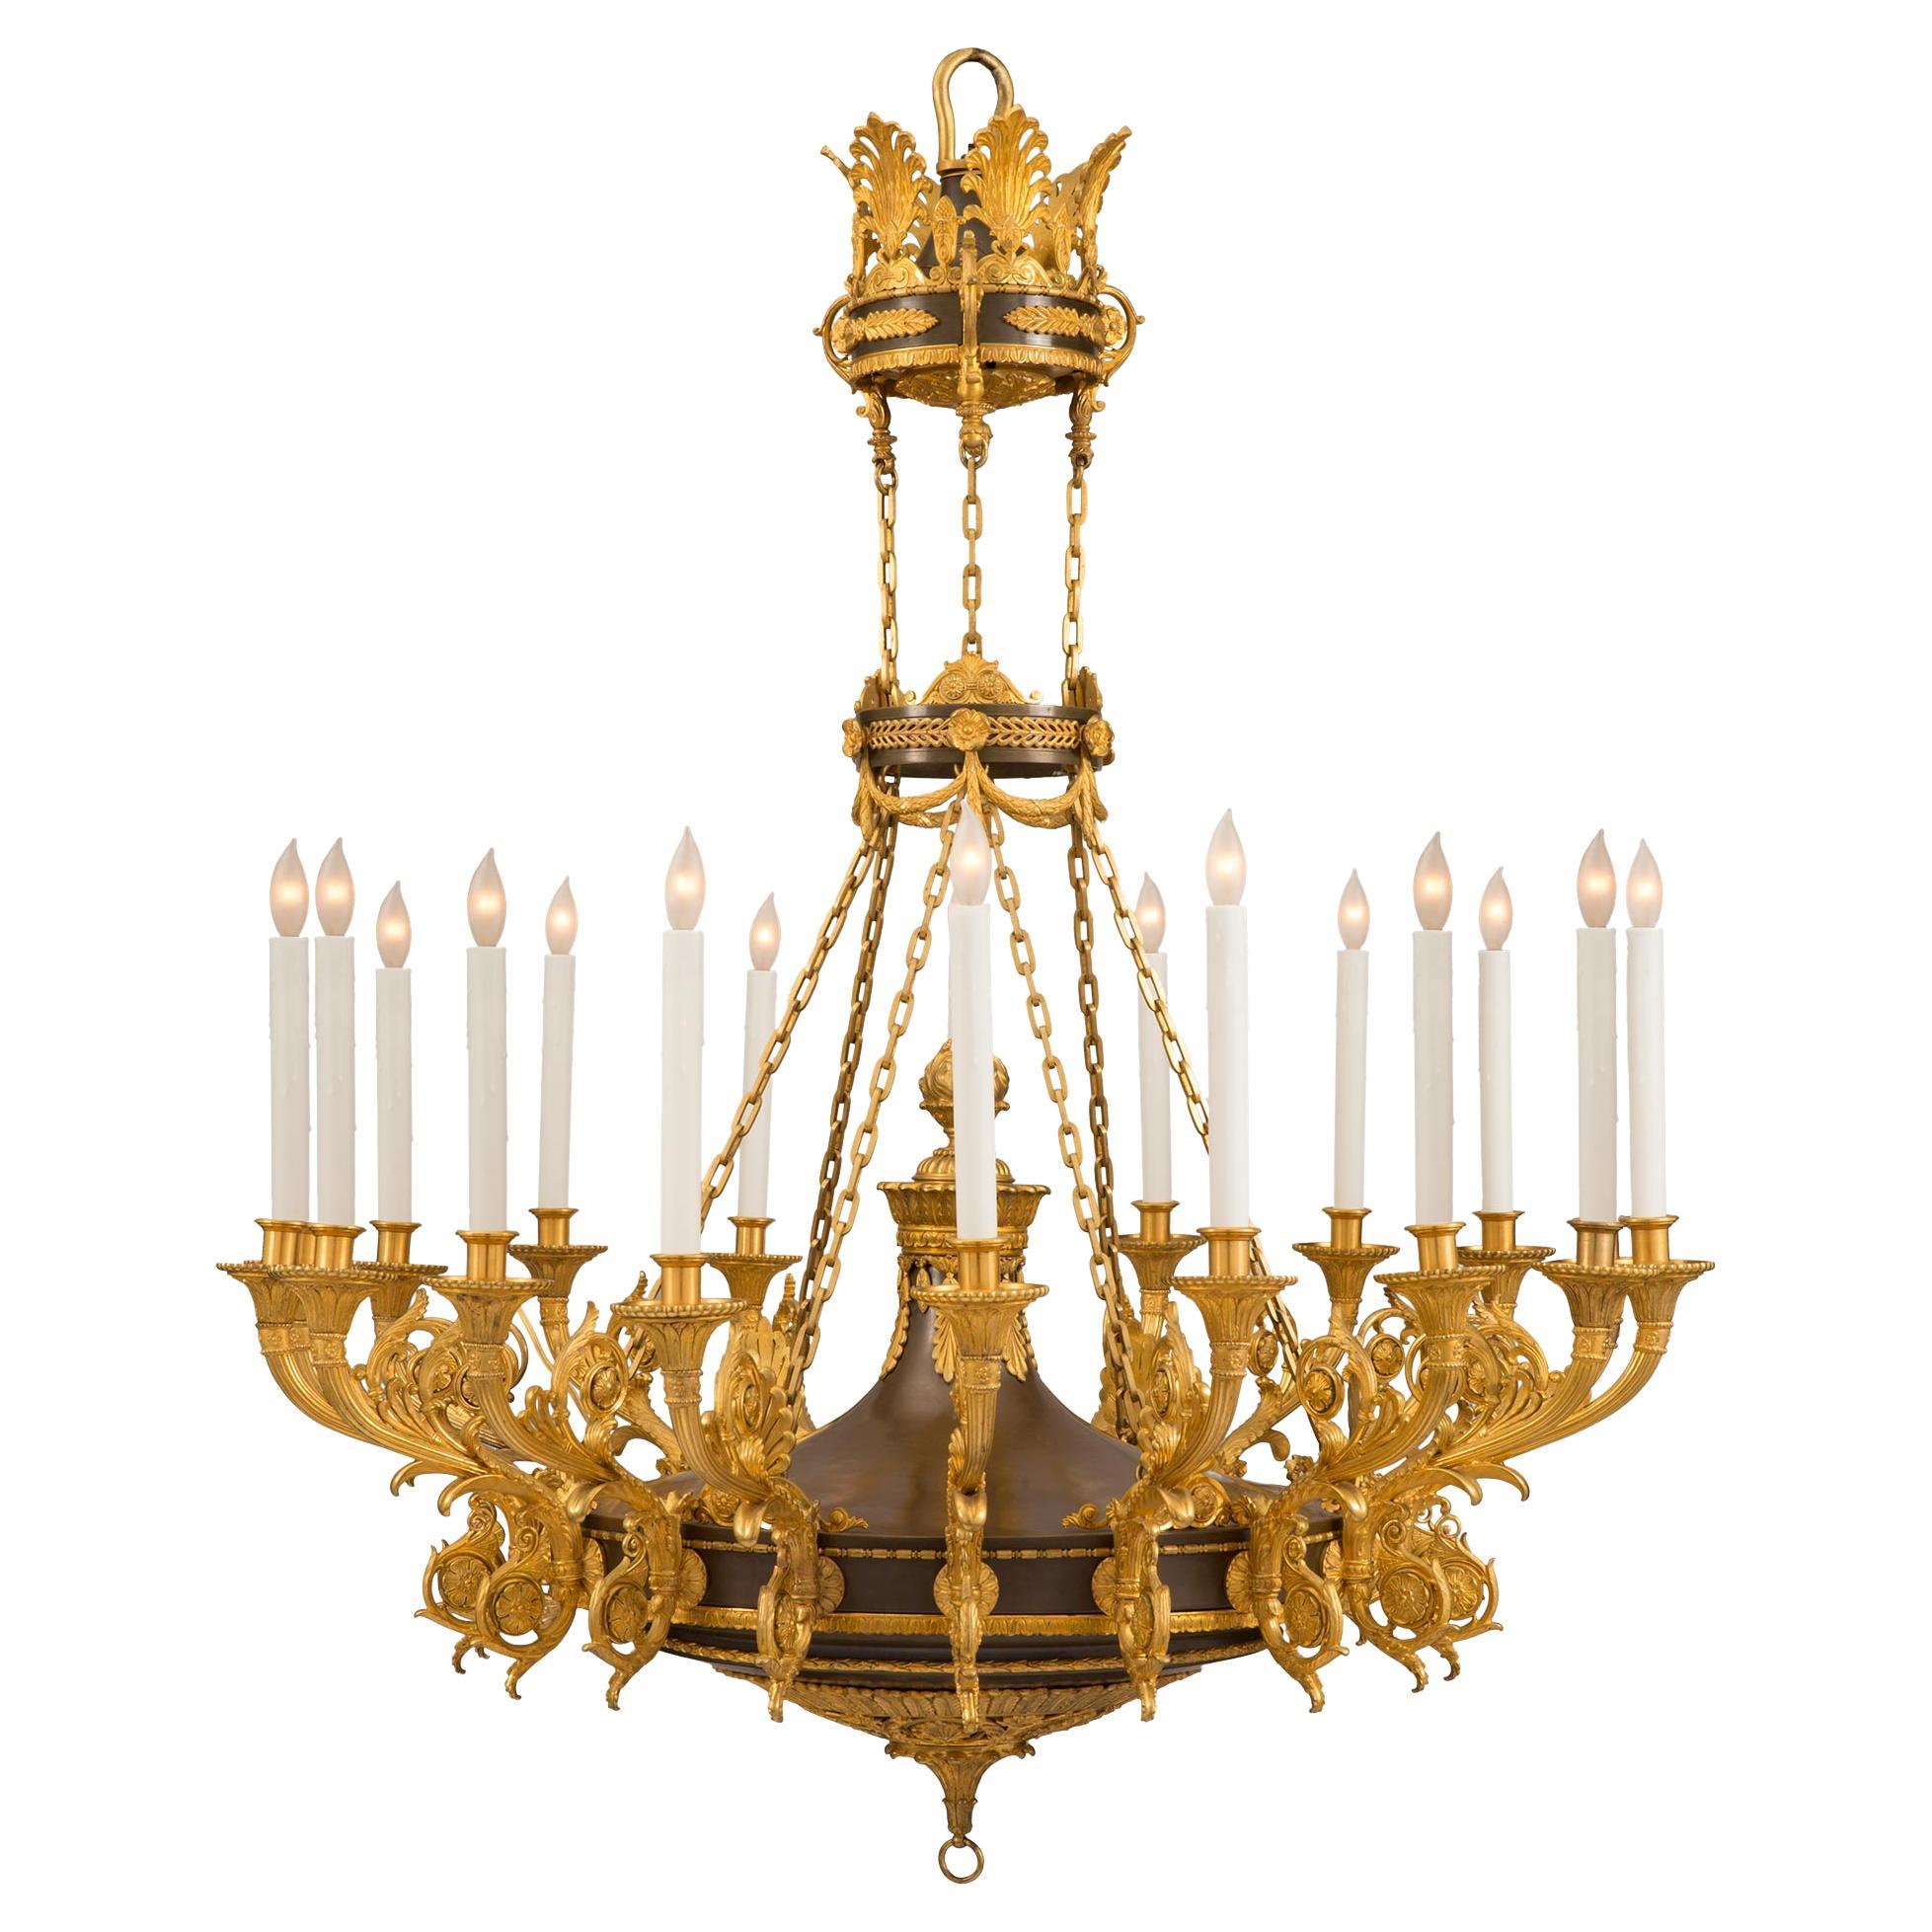 Russian 19th Century Empire St. Patinated Bronze and Ormolu Chandelier